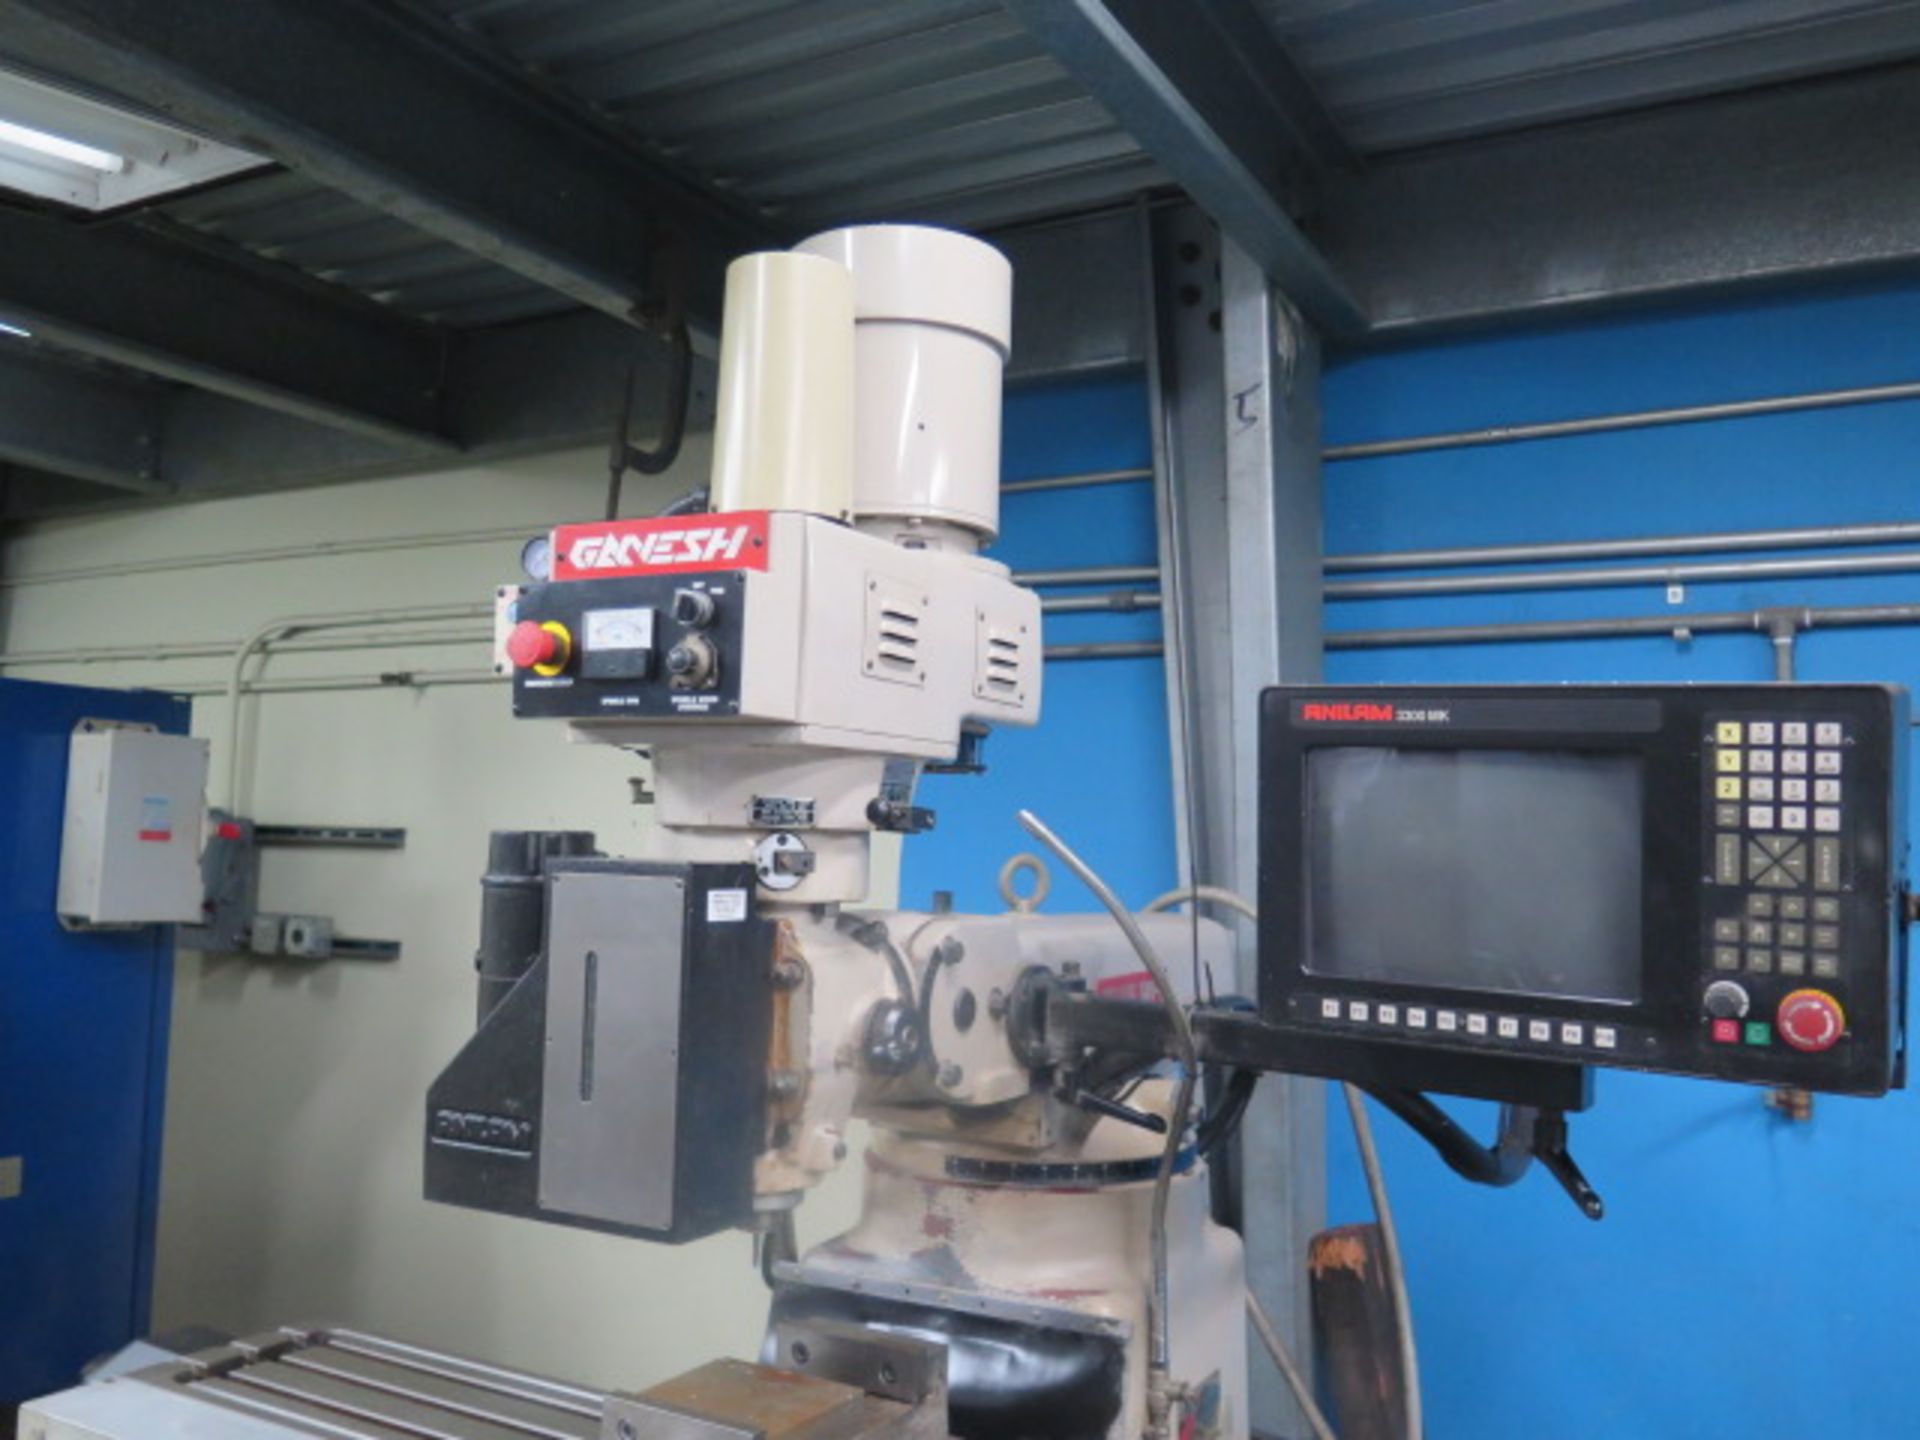 2000 Ganesh Deluxe GMV-3 3-Axis CNC Vertical Mill s/n 11617 w/ Anilam 3300 MK Controls, SOLD AS IS - Image 3 of 15